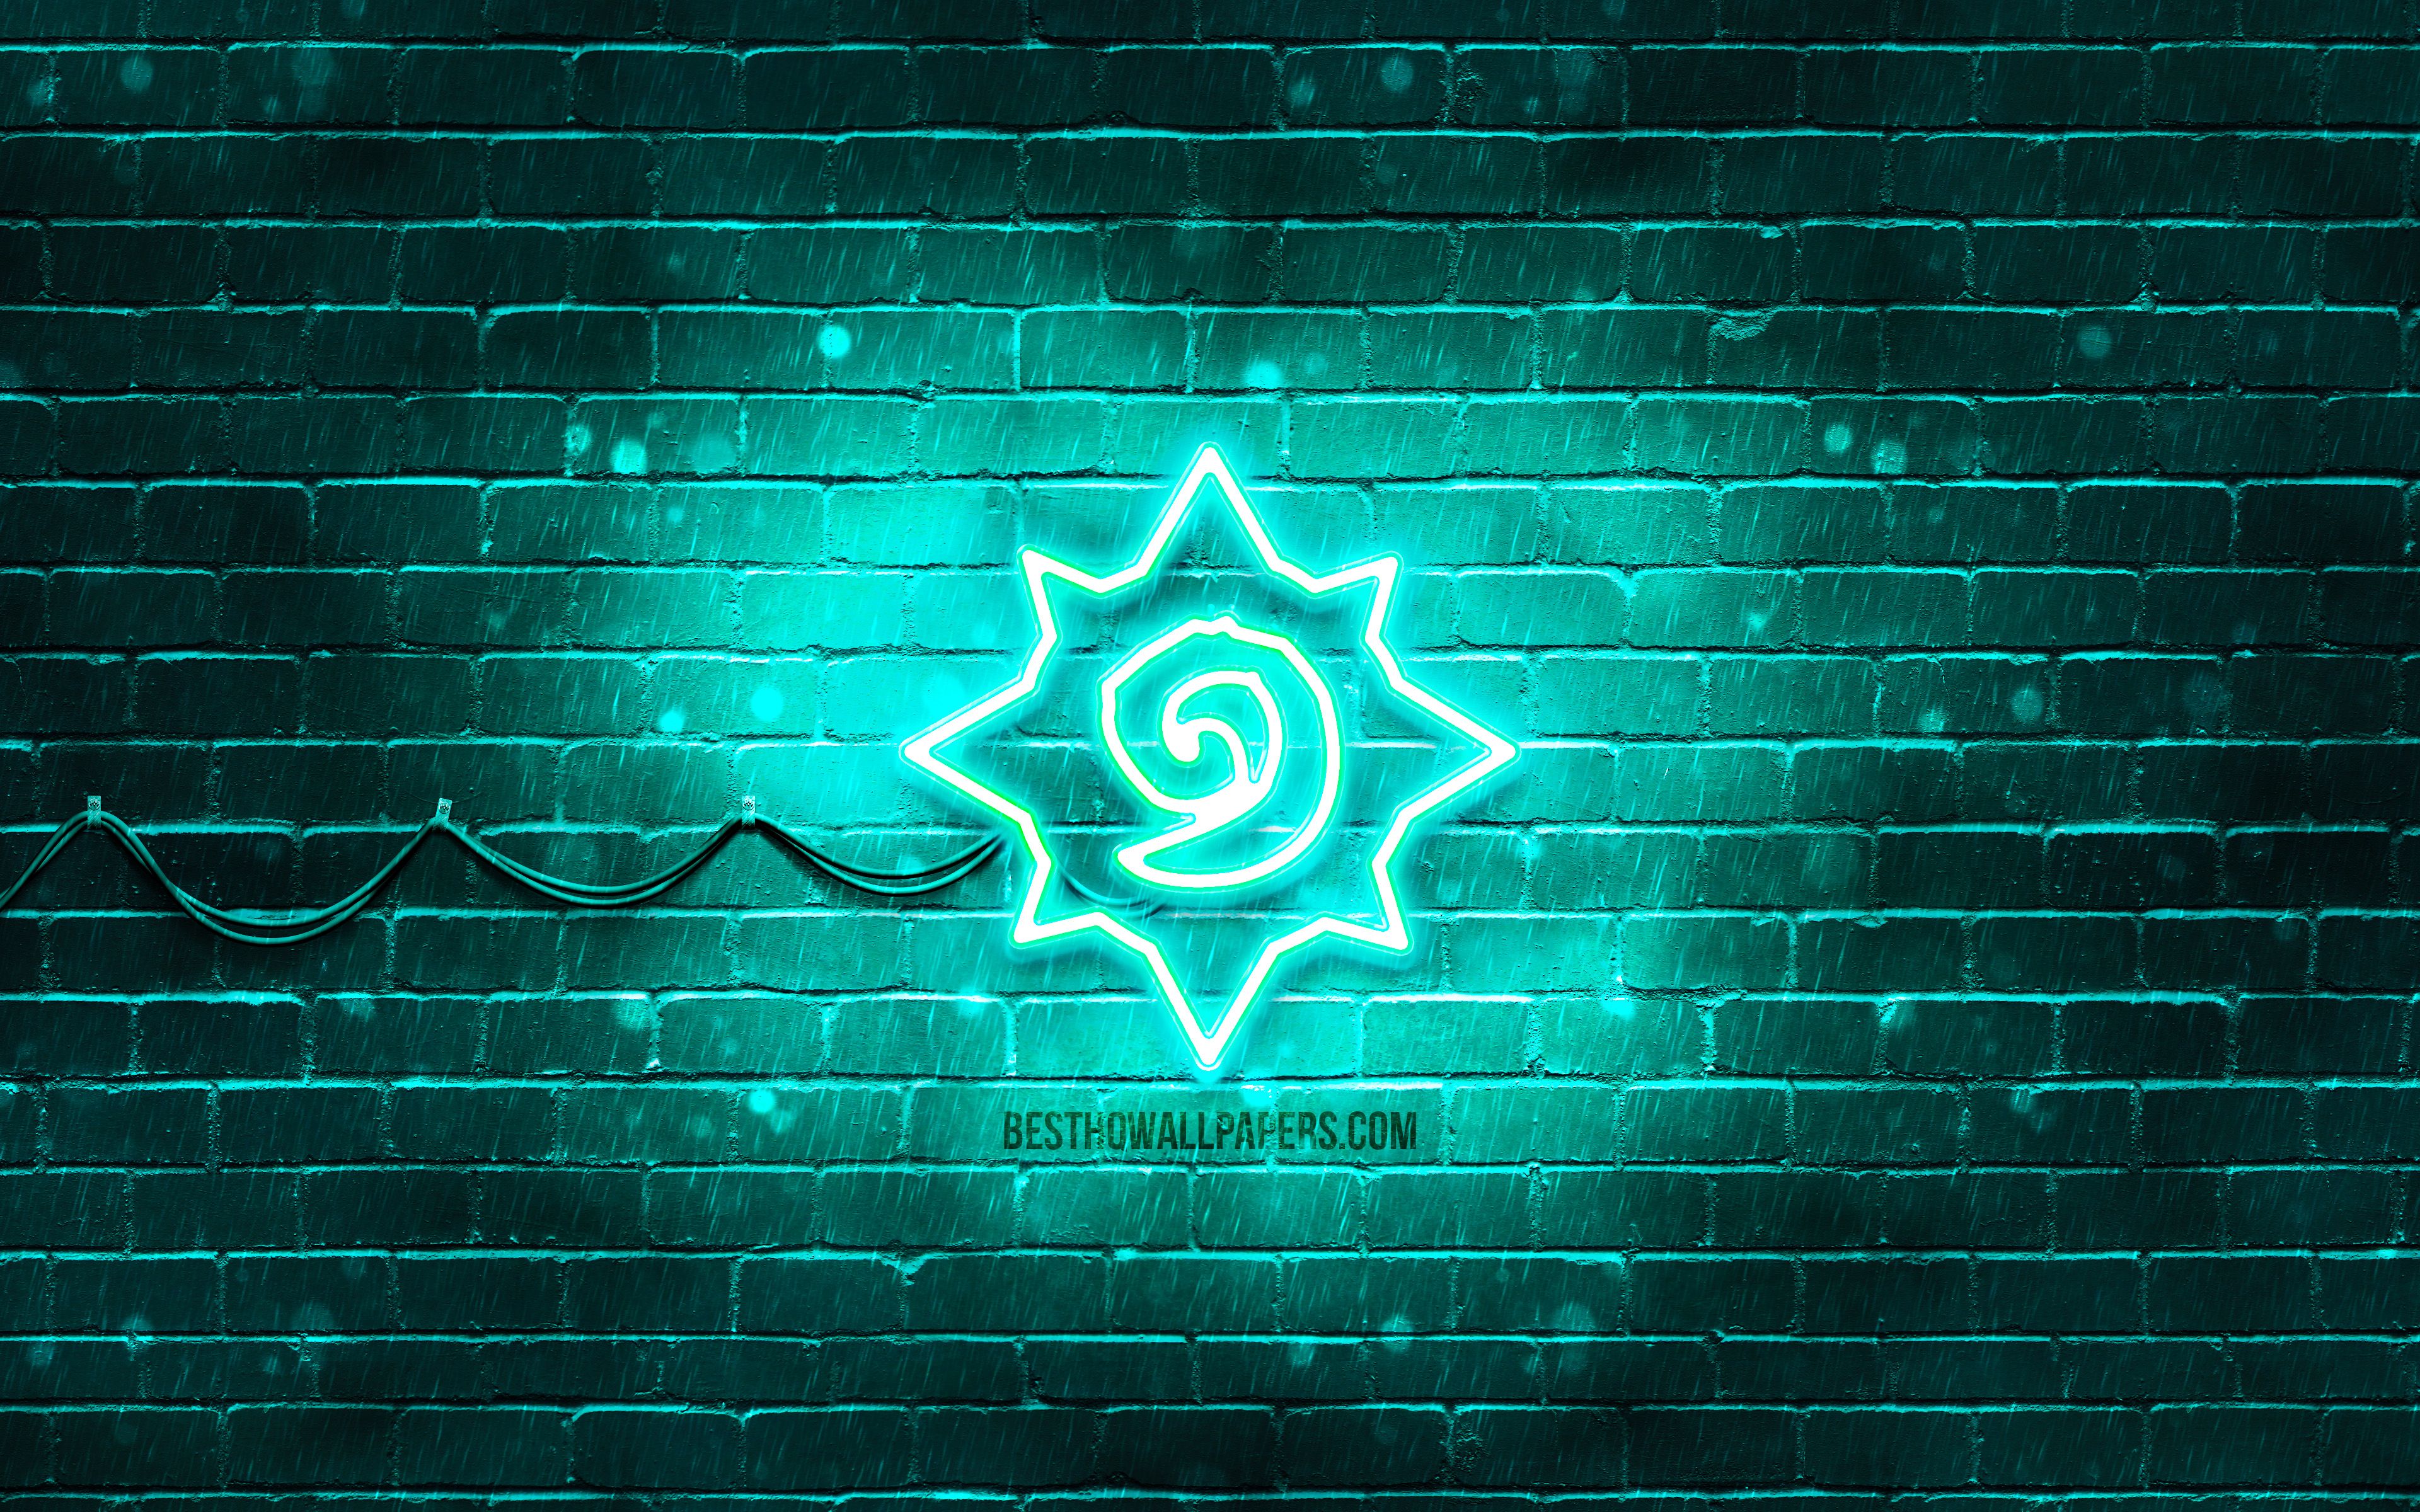 Download wallpaper Hearthstone turquoise logo, 4k, turquoise